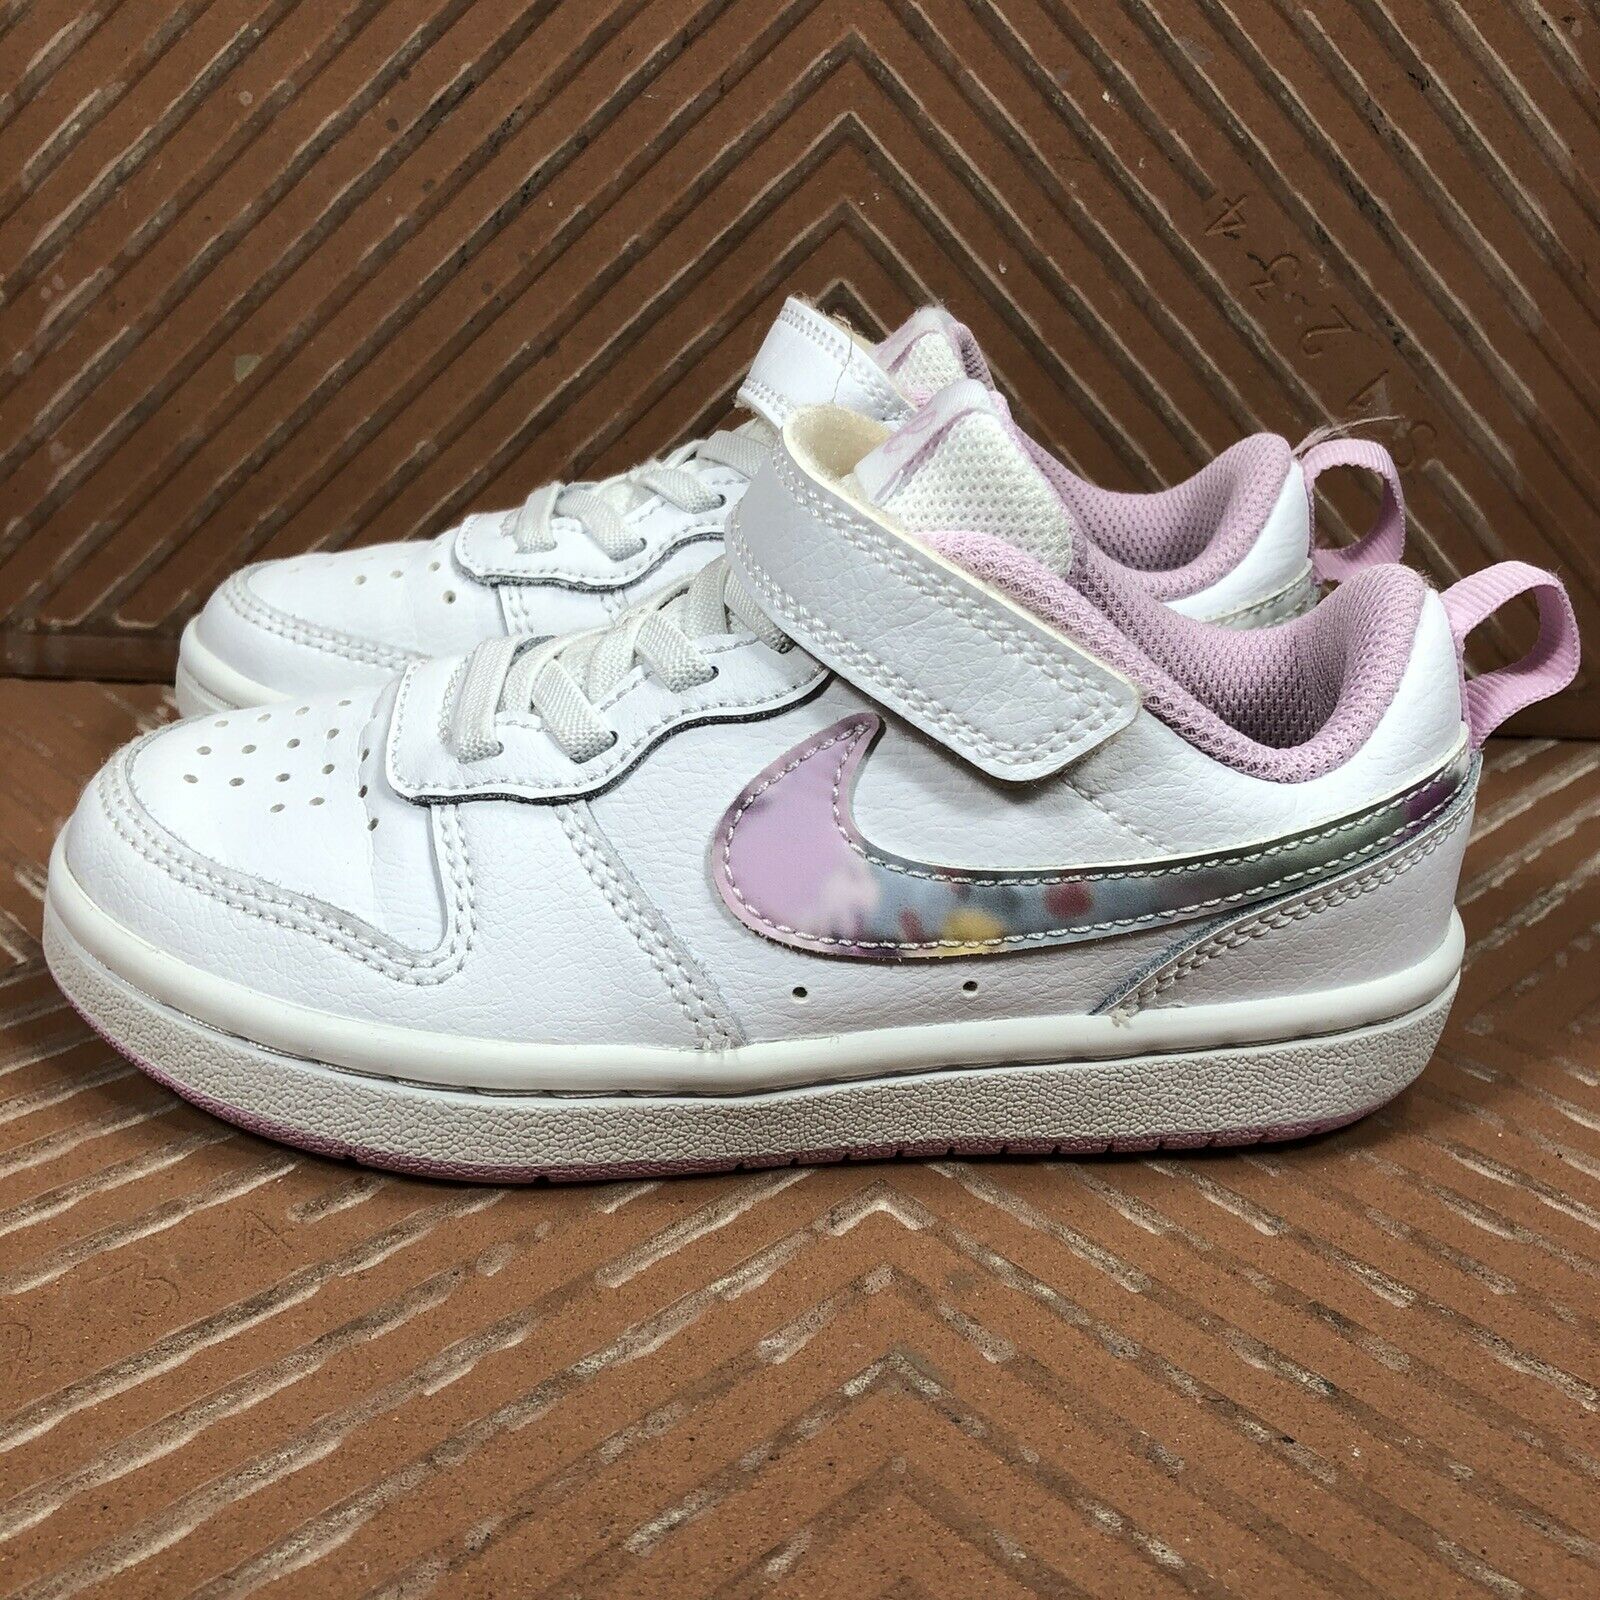 Nike Court Borough Low 2 SE GS Floral Swoosh Girls 11C White Multi Colored Shoes